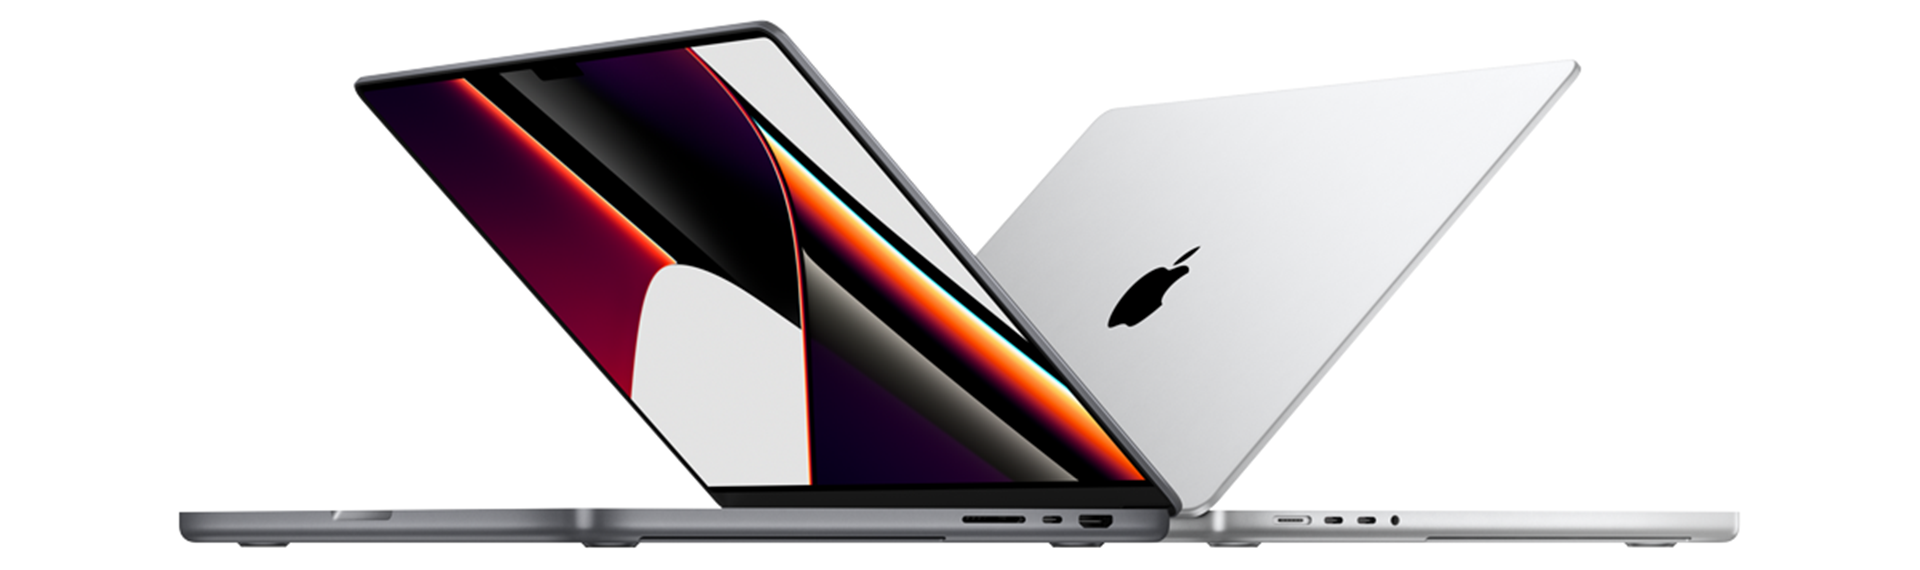 macbook-pro-14-and-16_overview__fz0lron5xyuu_og.png